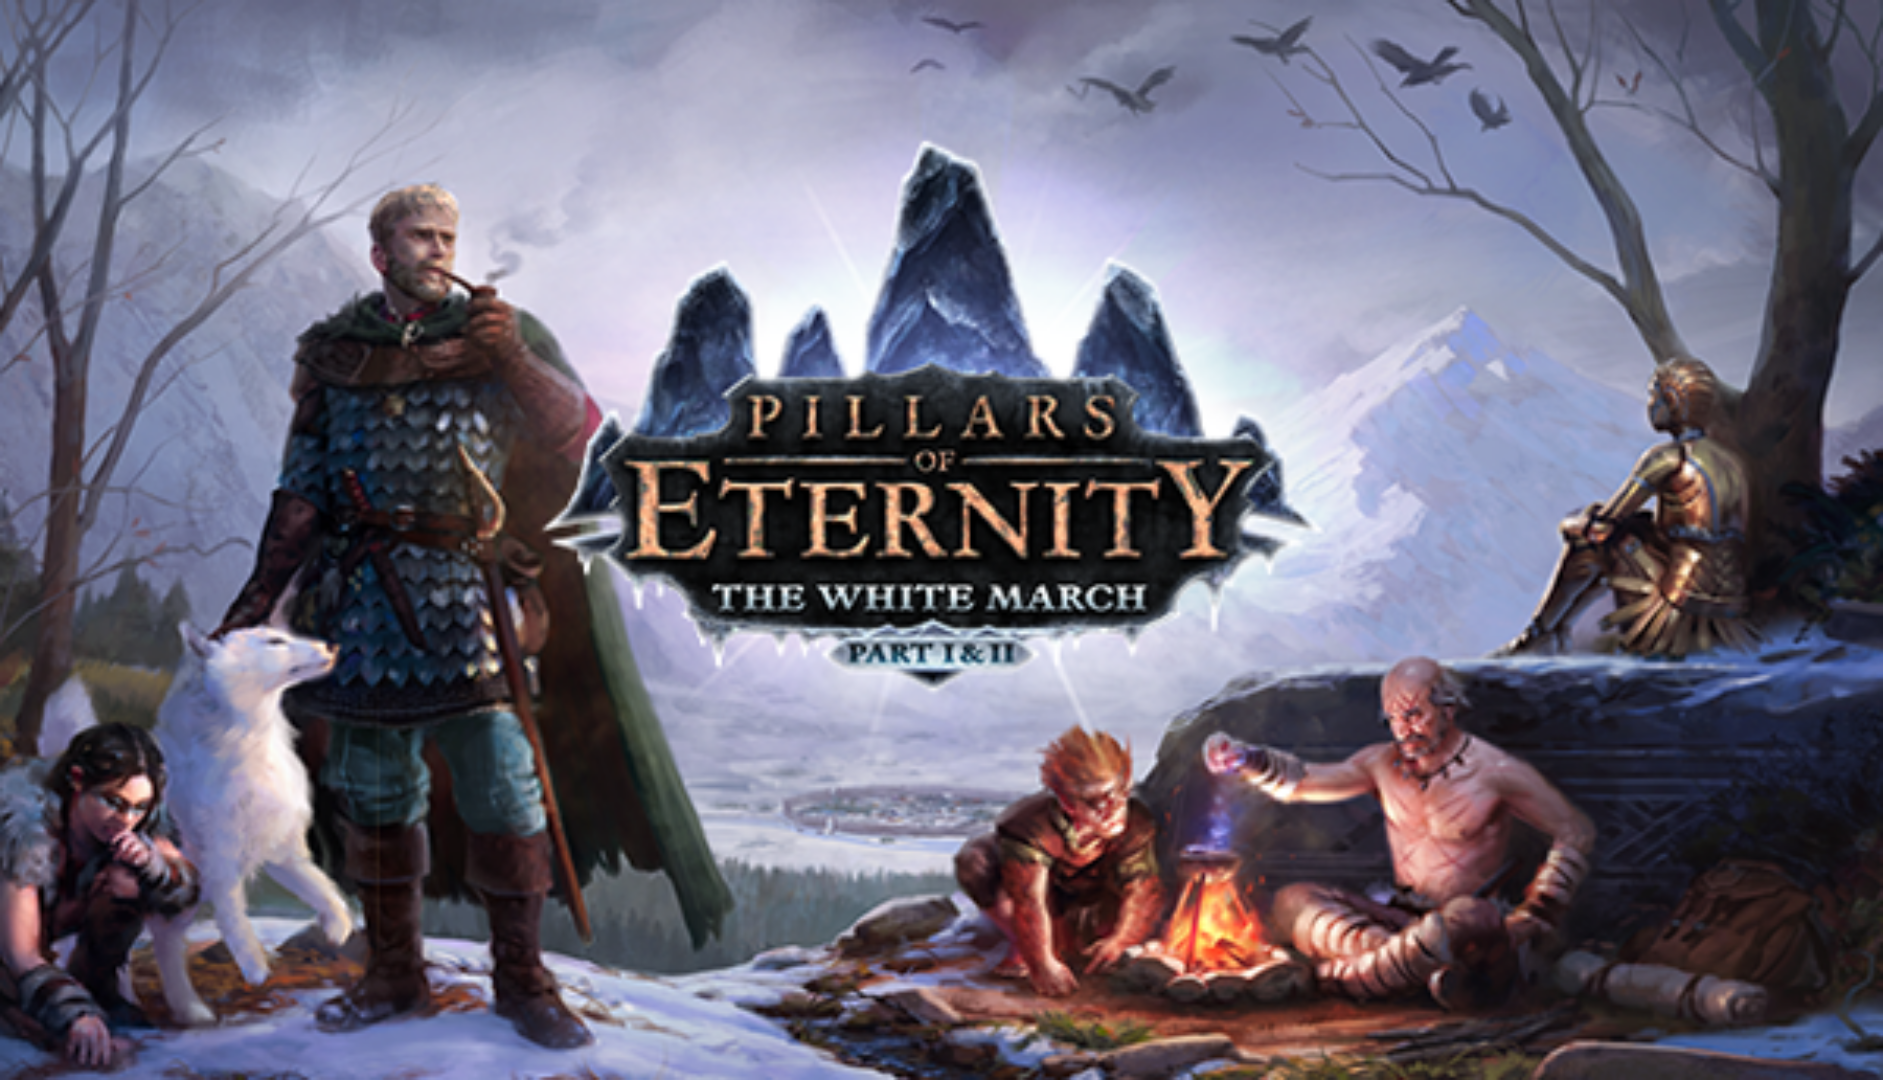 Pillars of Eternity Releases its First Expansion, ‘The White March: Part I’